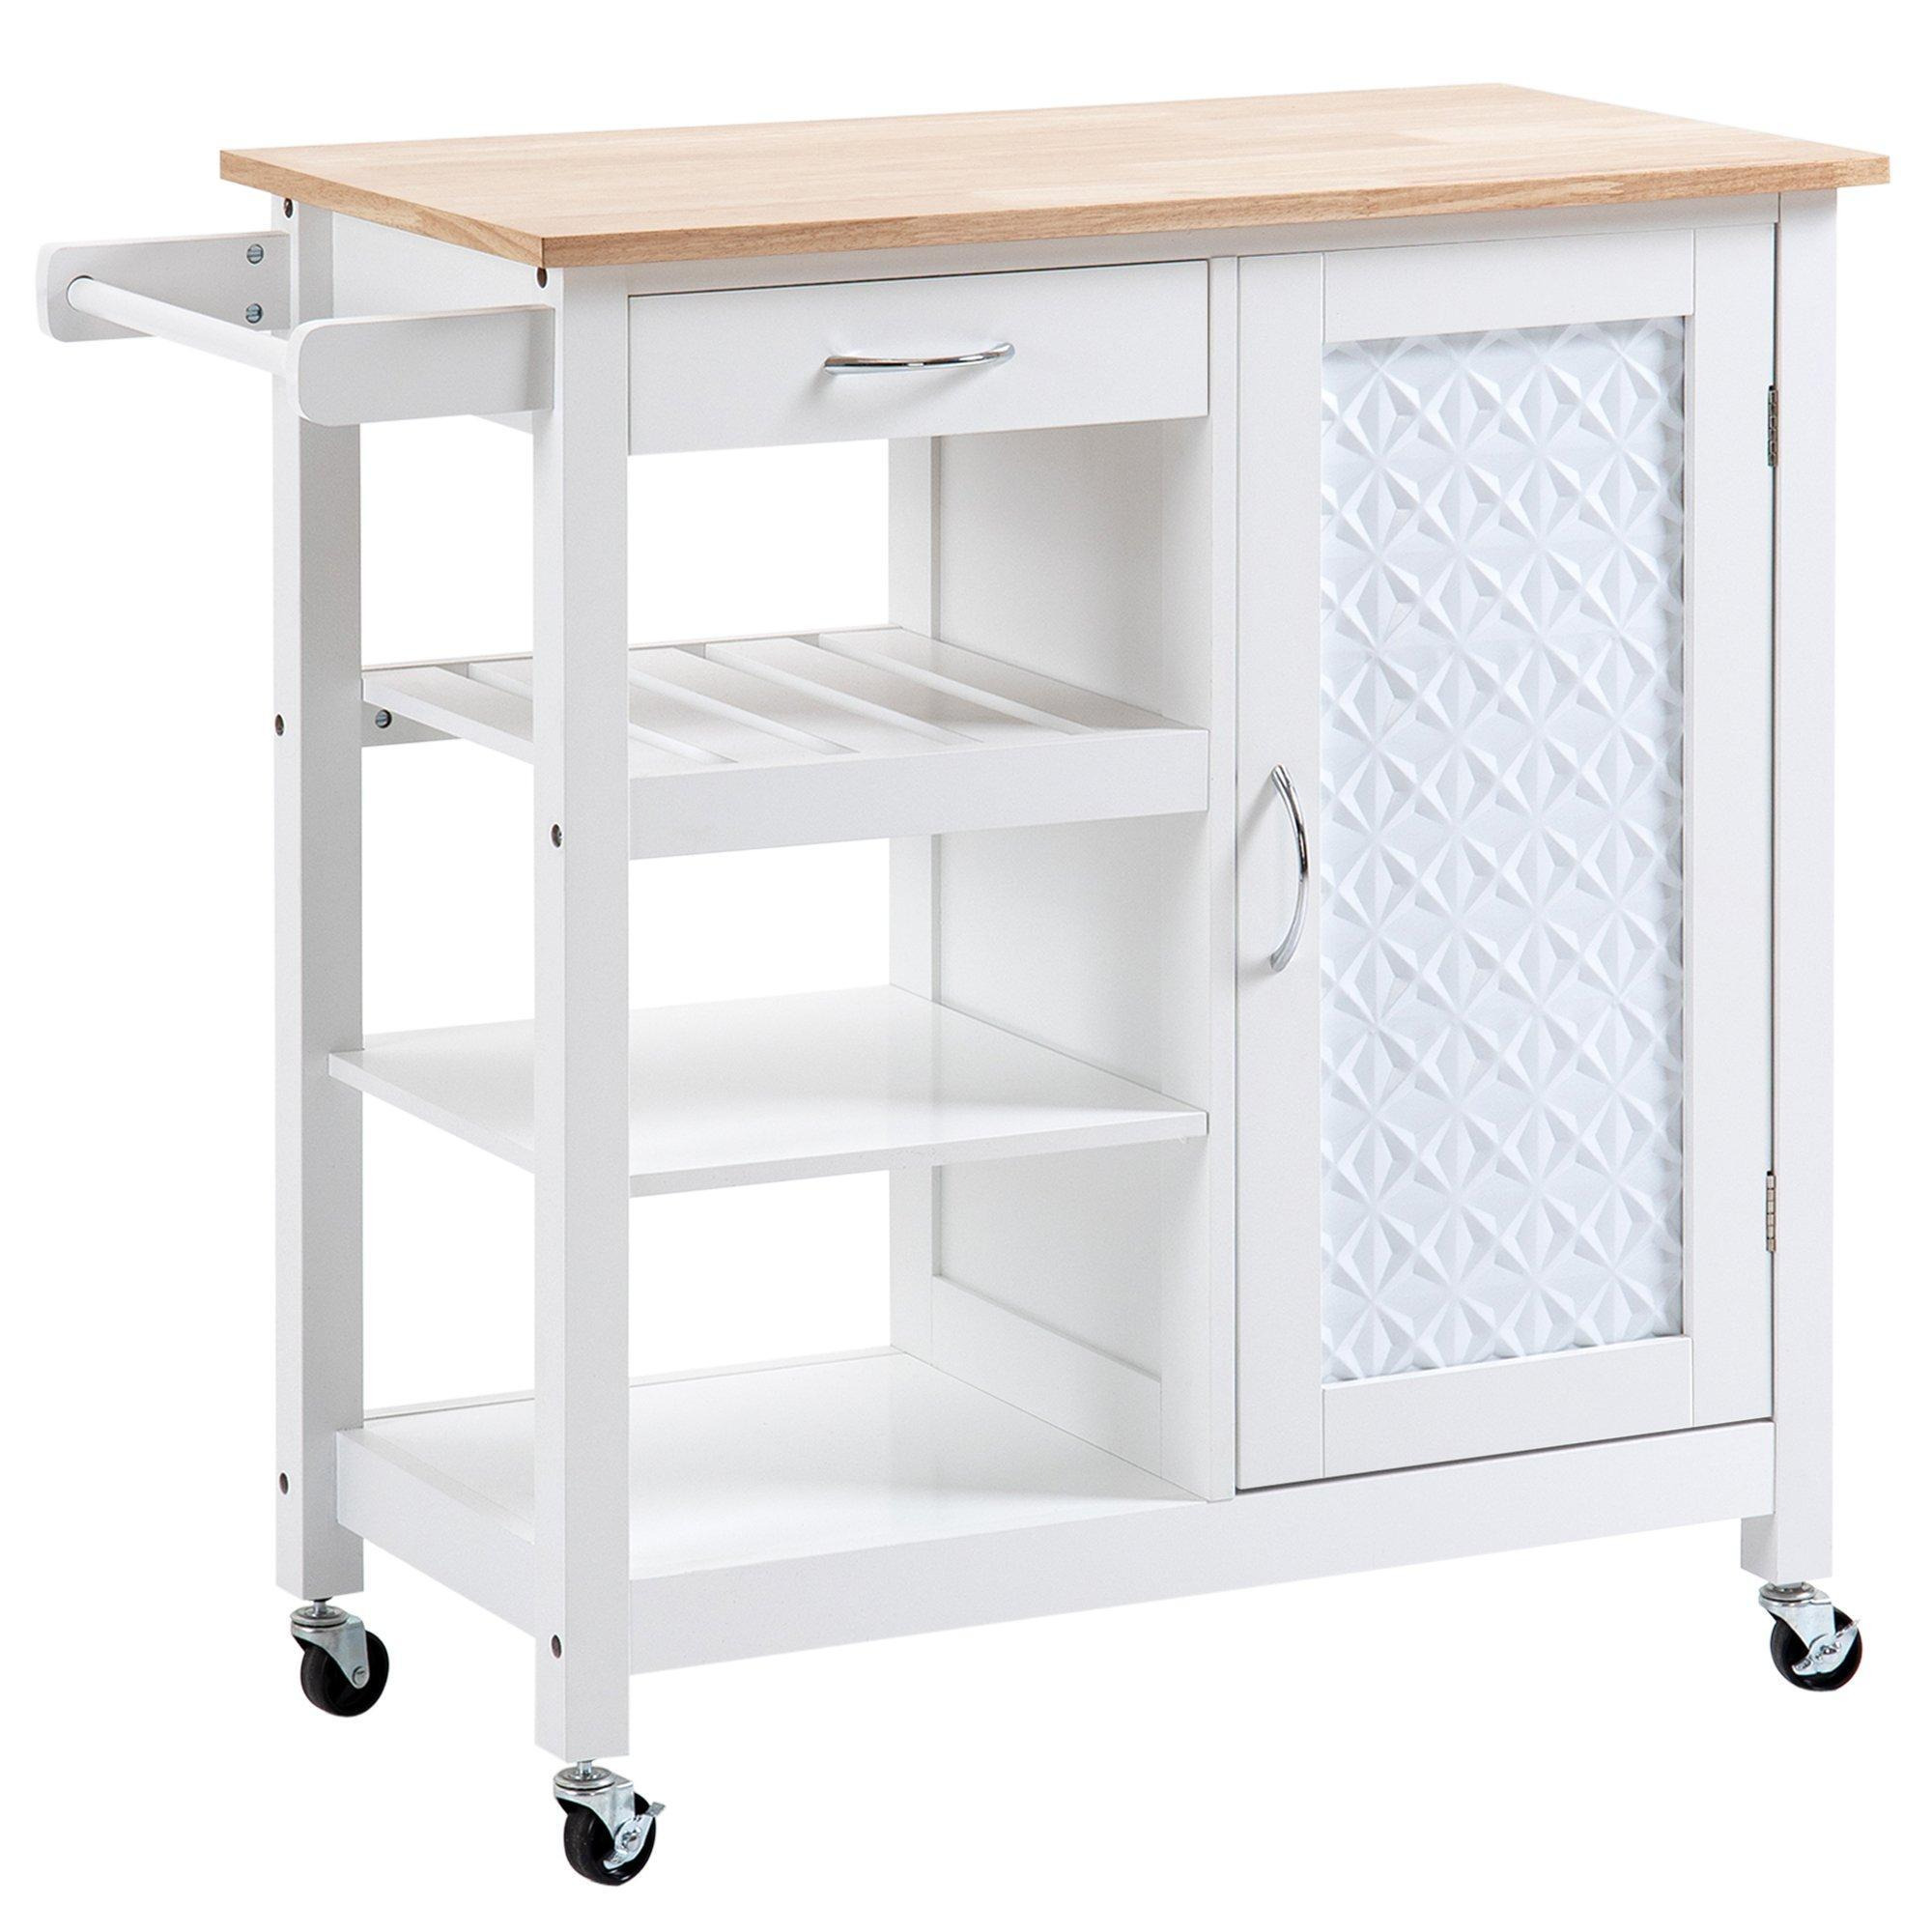 Compact Kitchen Trolley Utility Cart on Wheels with Embossed Door - image 1